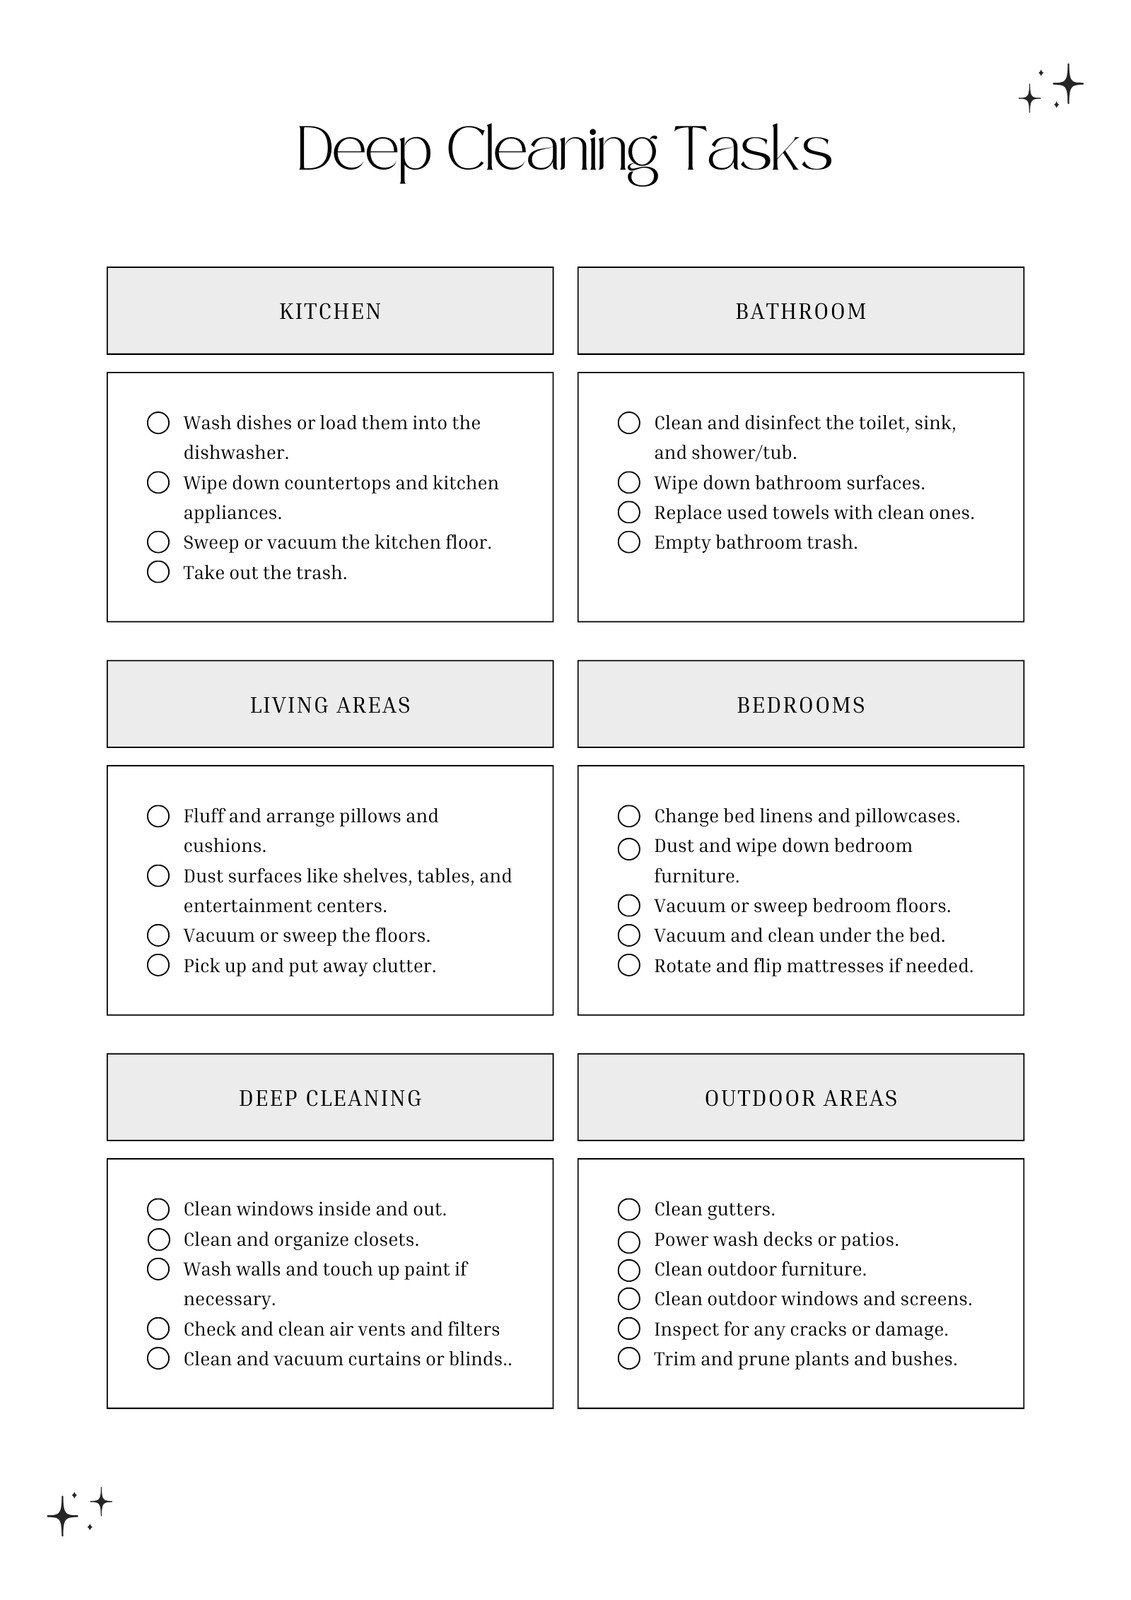 15-Minute Speed Cleaning Checklist + FREE Printable